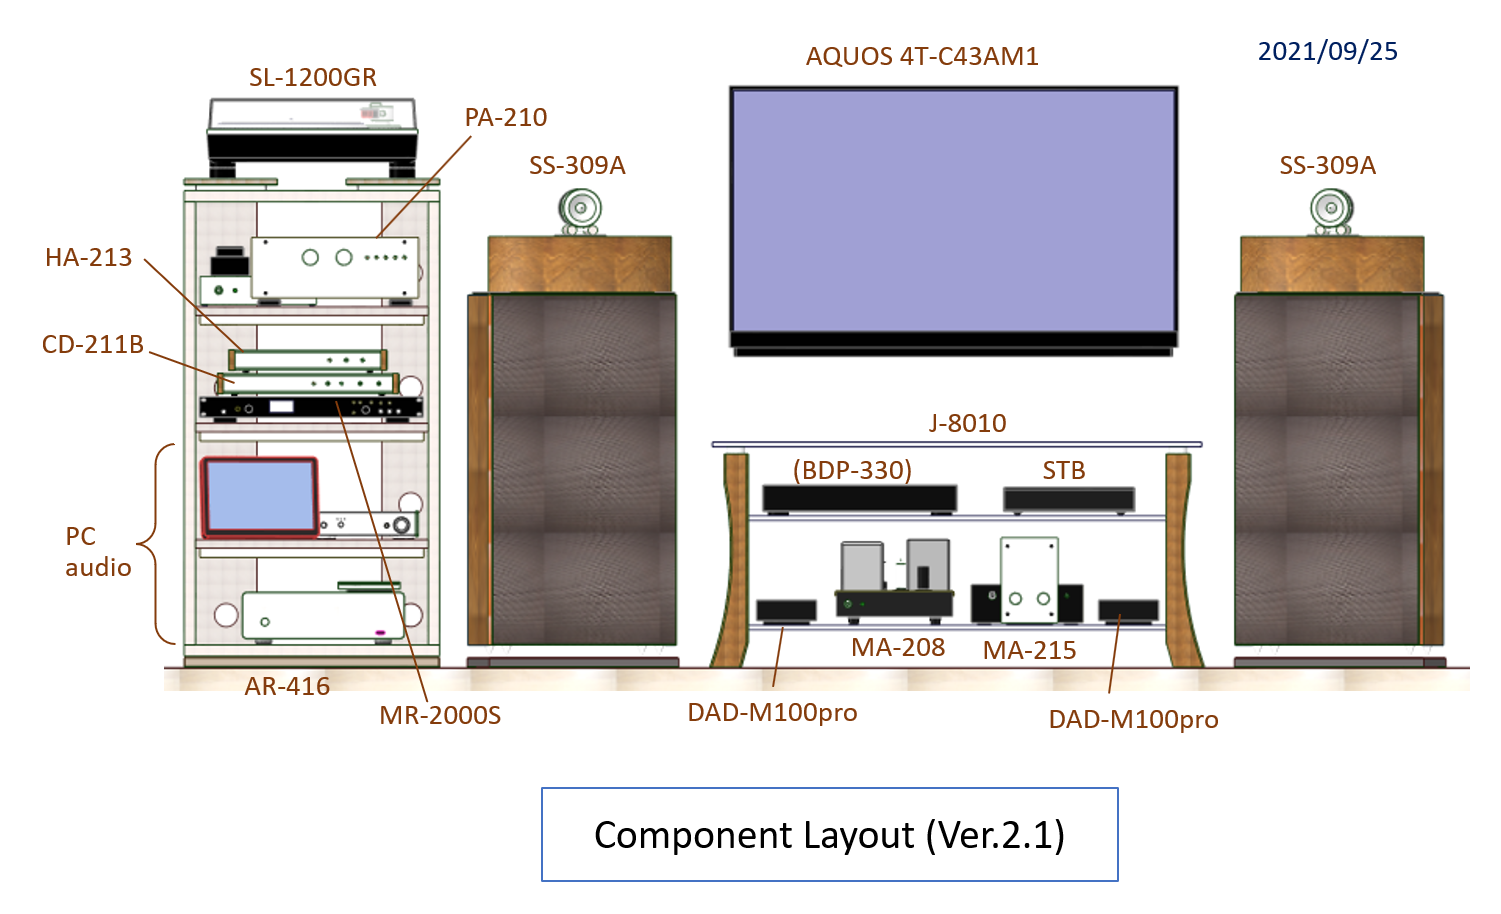 Gaudi Ver.2.1 Component Layout